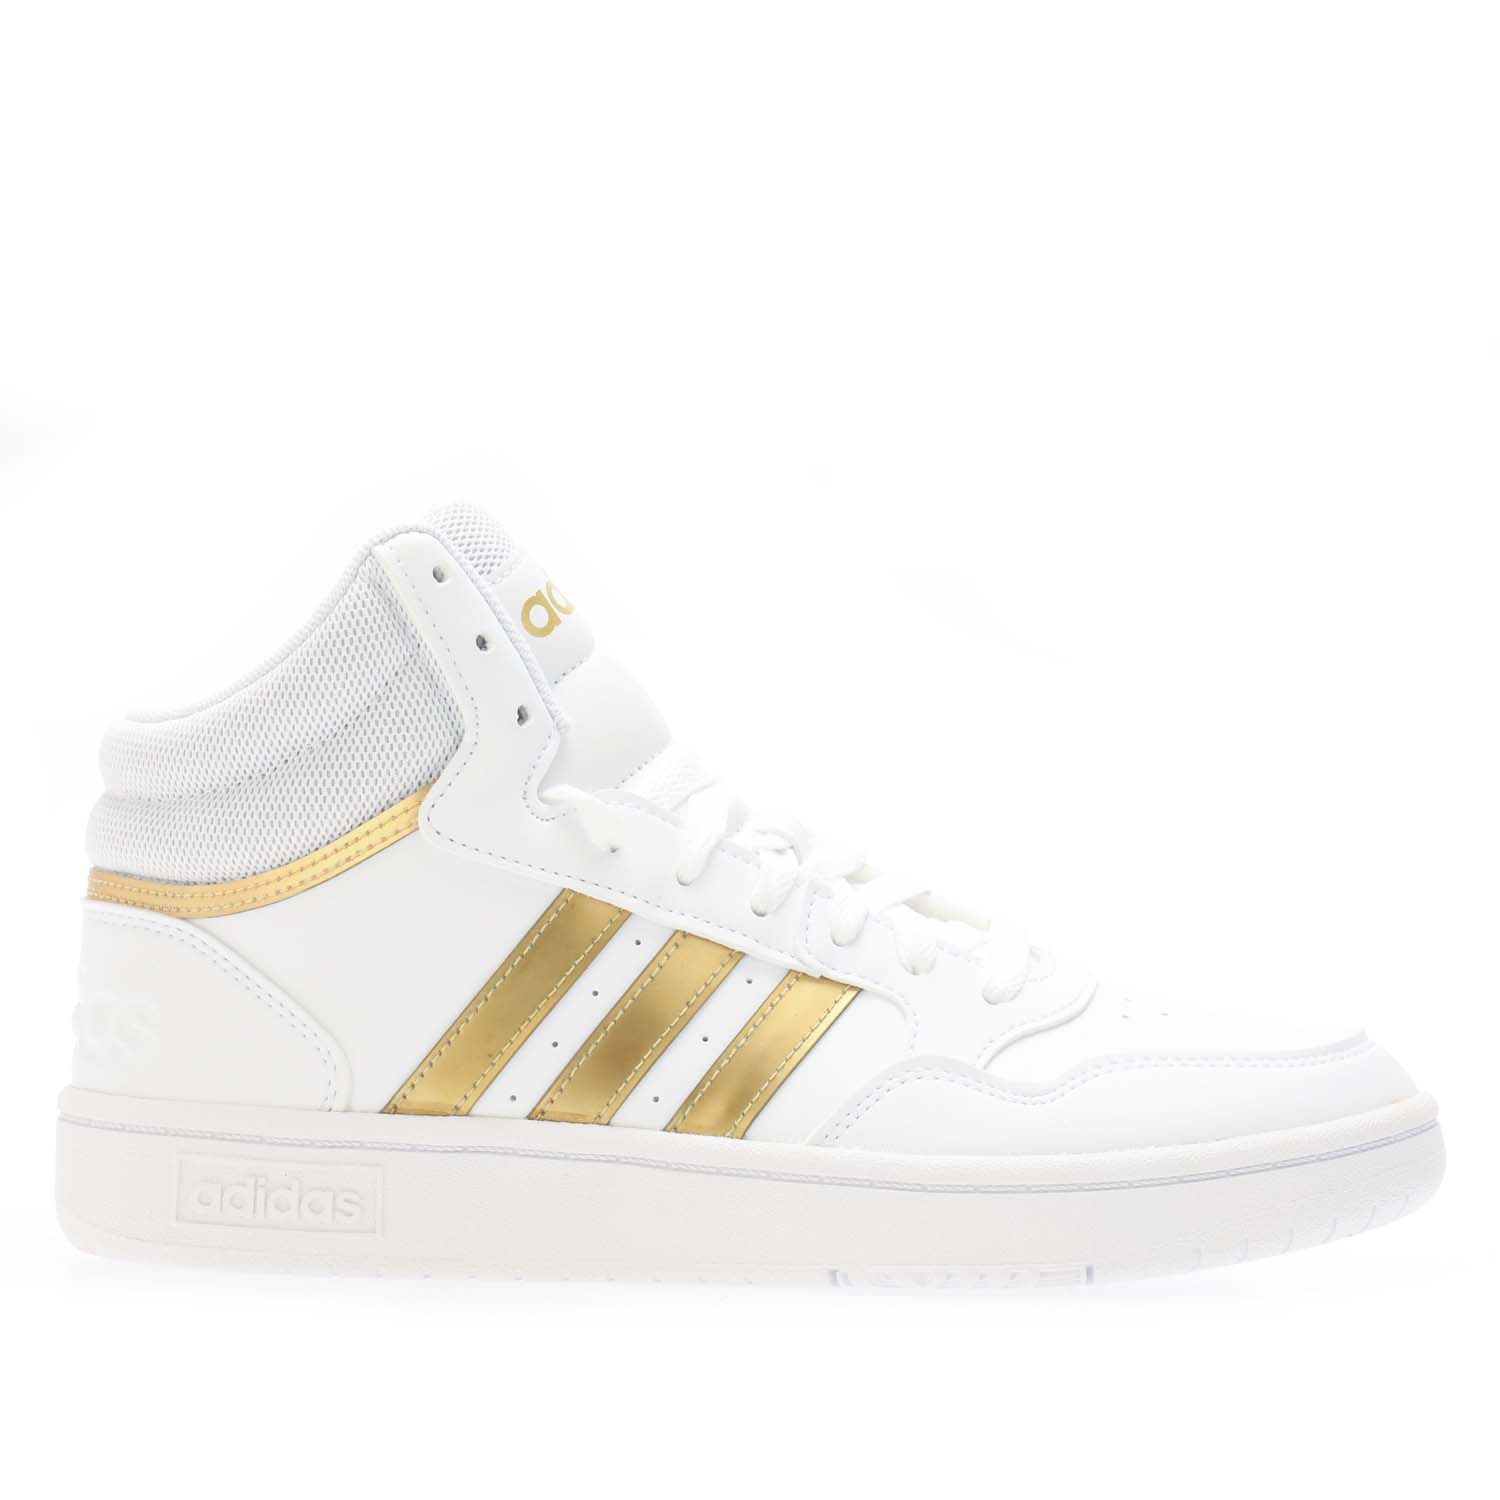 Womens Hoops 3.0 Classic Trainers